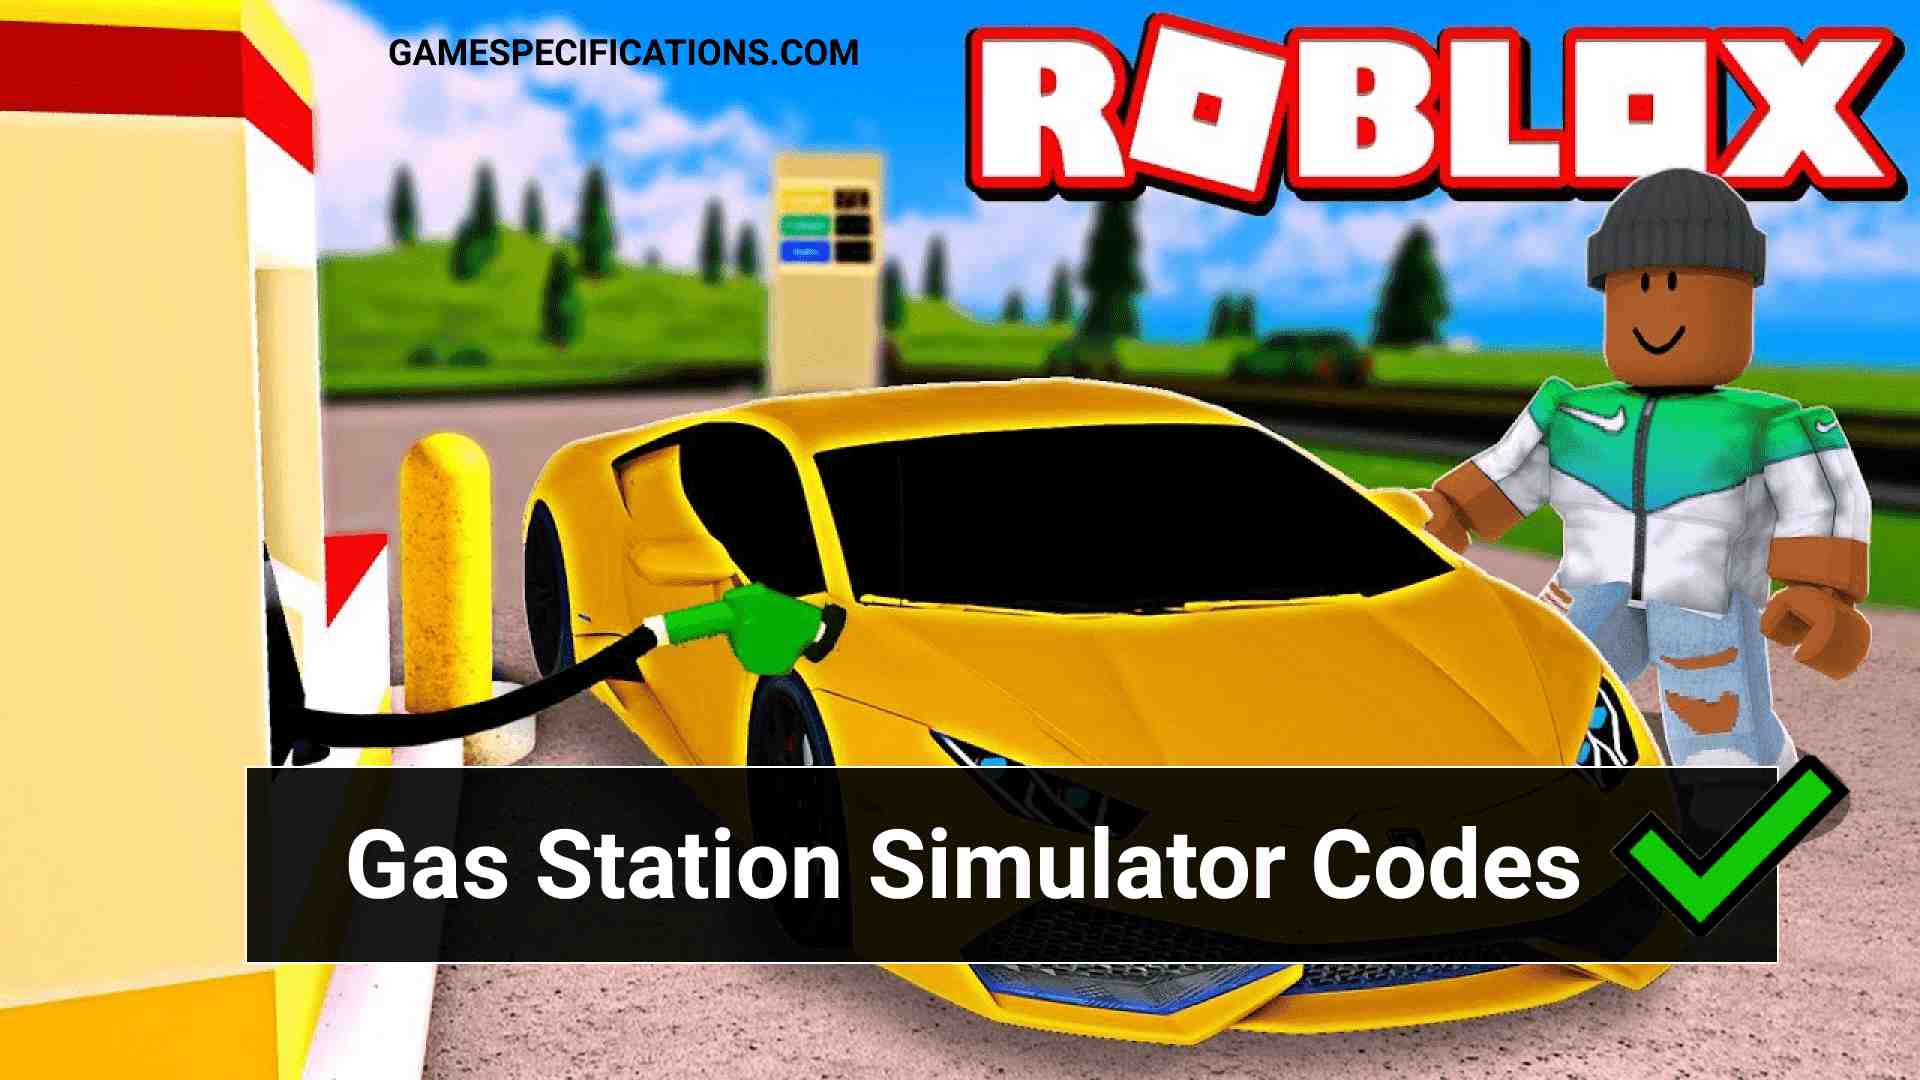 Roblox Gas Station Simulator Codes July 2021 Game Specifications - roblox gas station simulator money hack